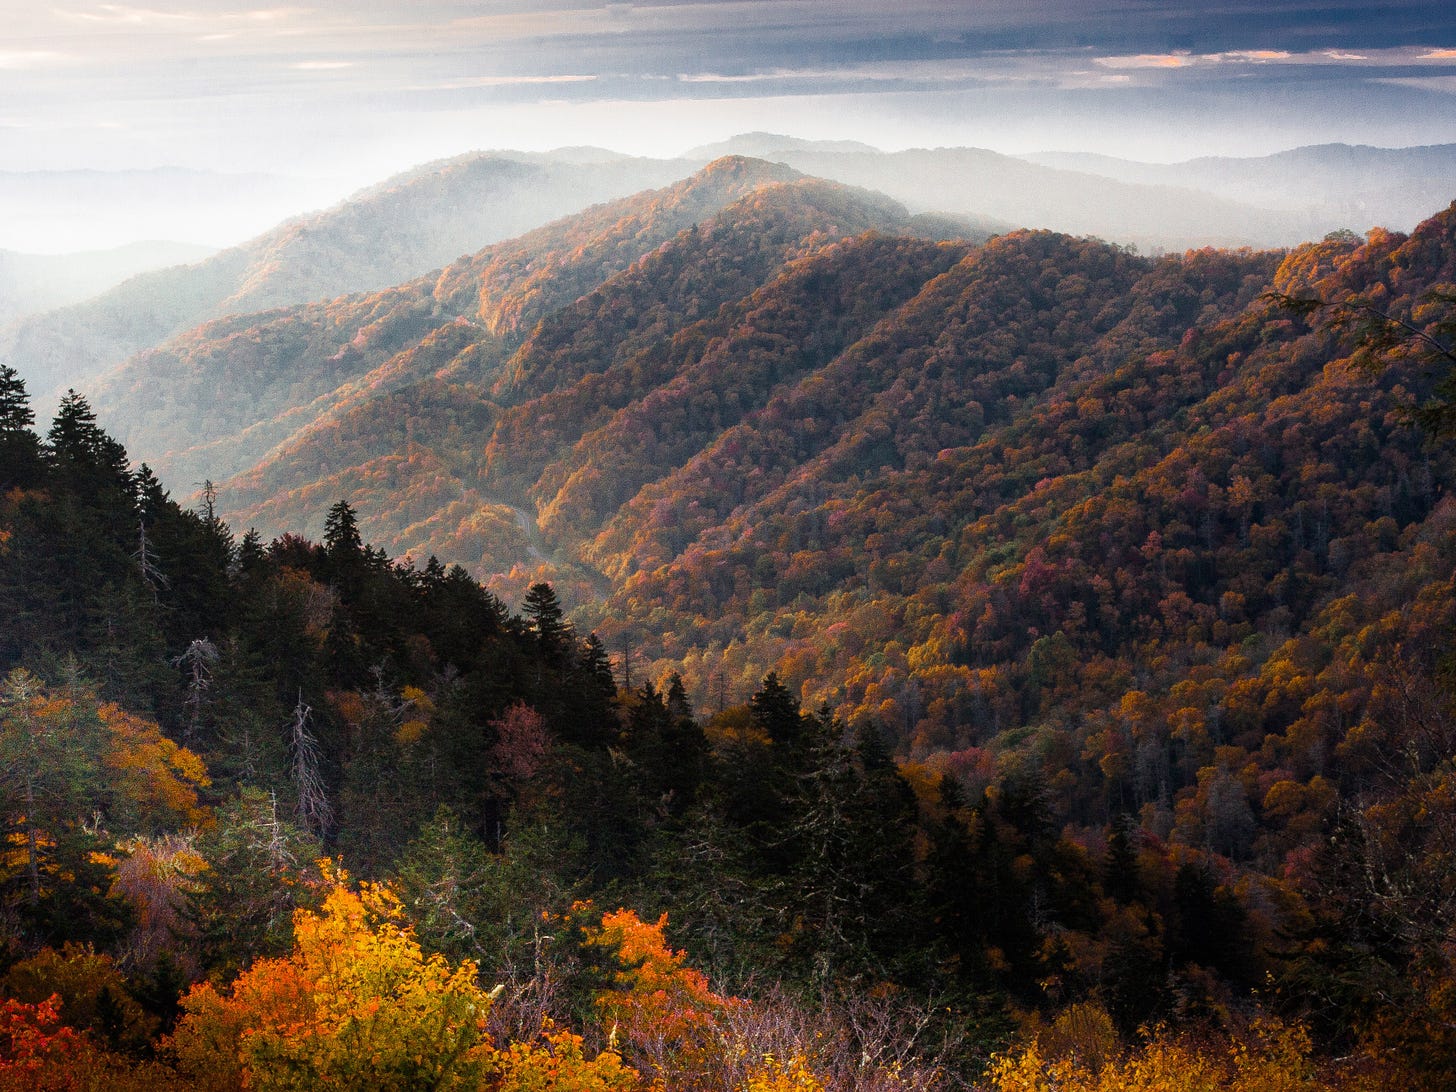 The Appalachian Mountains May Have Once Been as Tall as the Himalayas |  Condé Nast Traveler